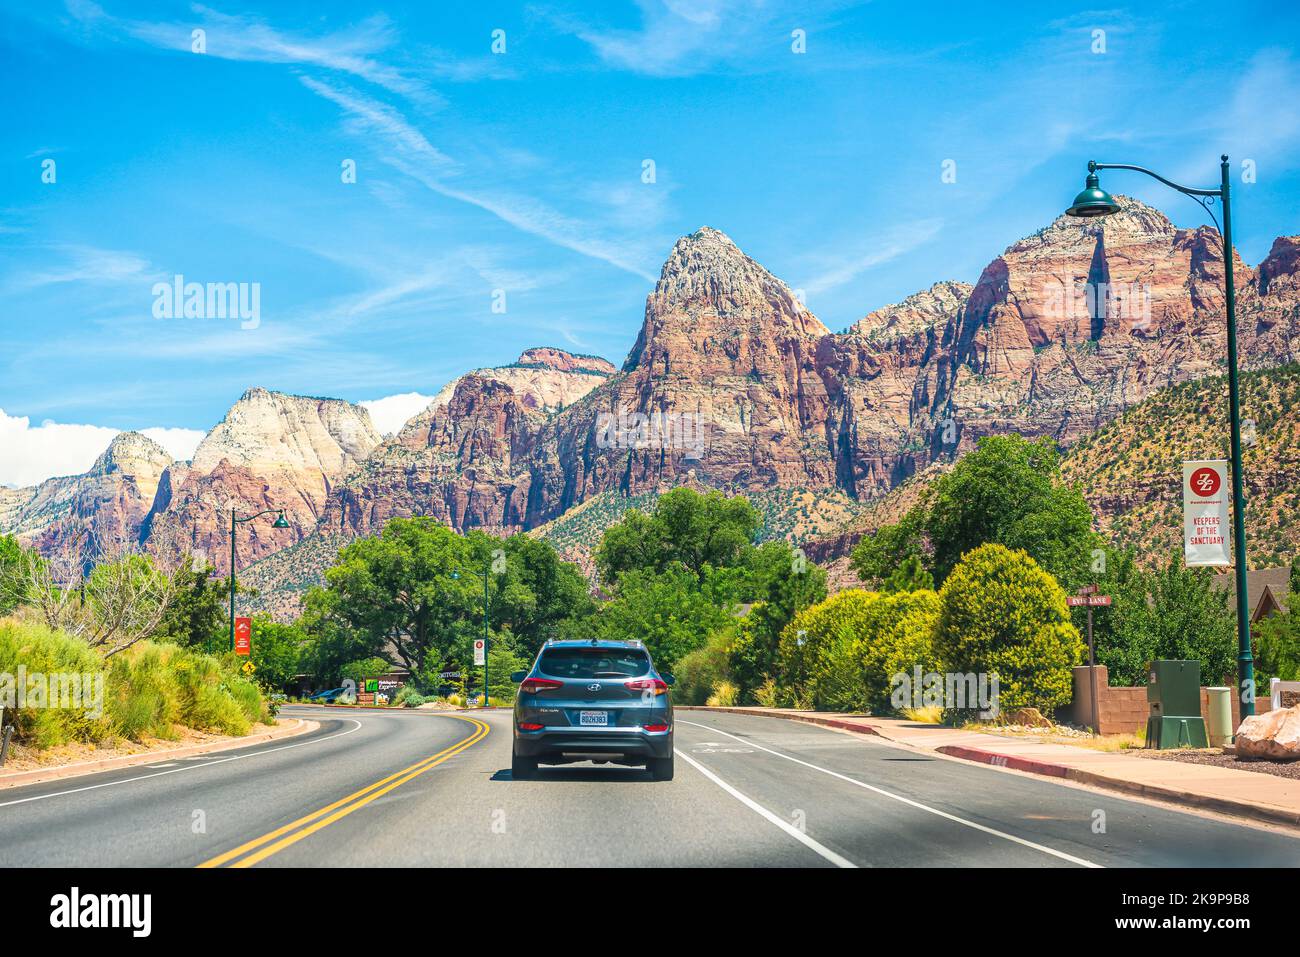 Springdale, USA - August 5, 2019: Mountain canyon town city by Zion national park with cars on main street road with canyons in background in summer Stock Photo